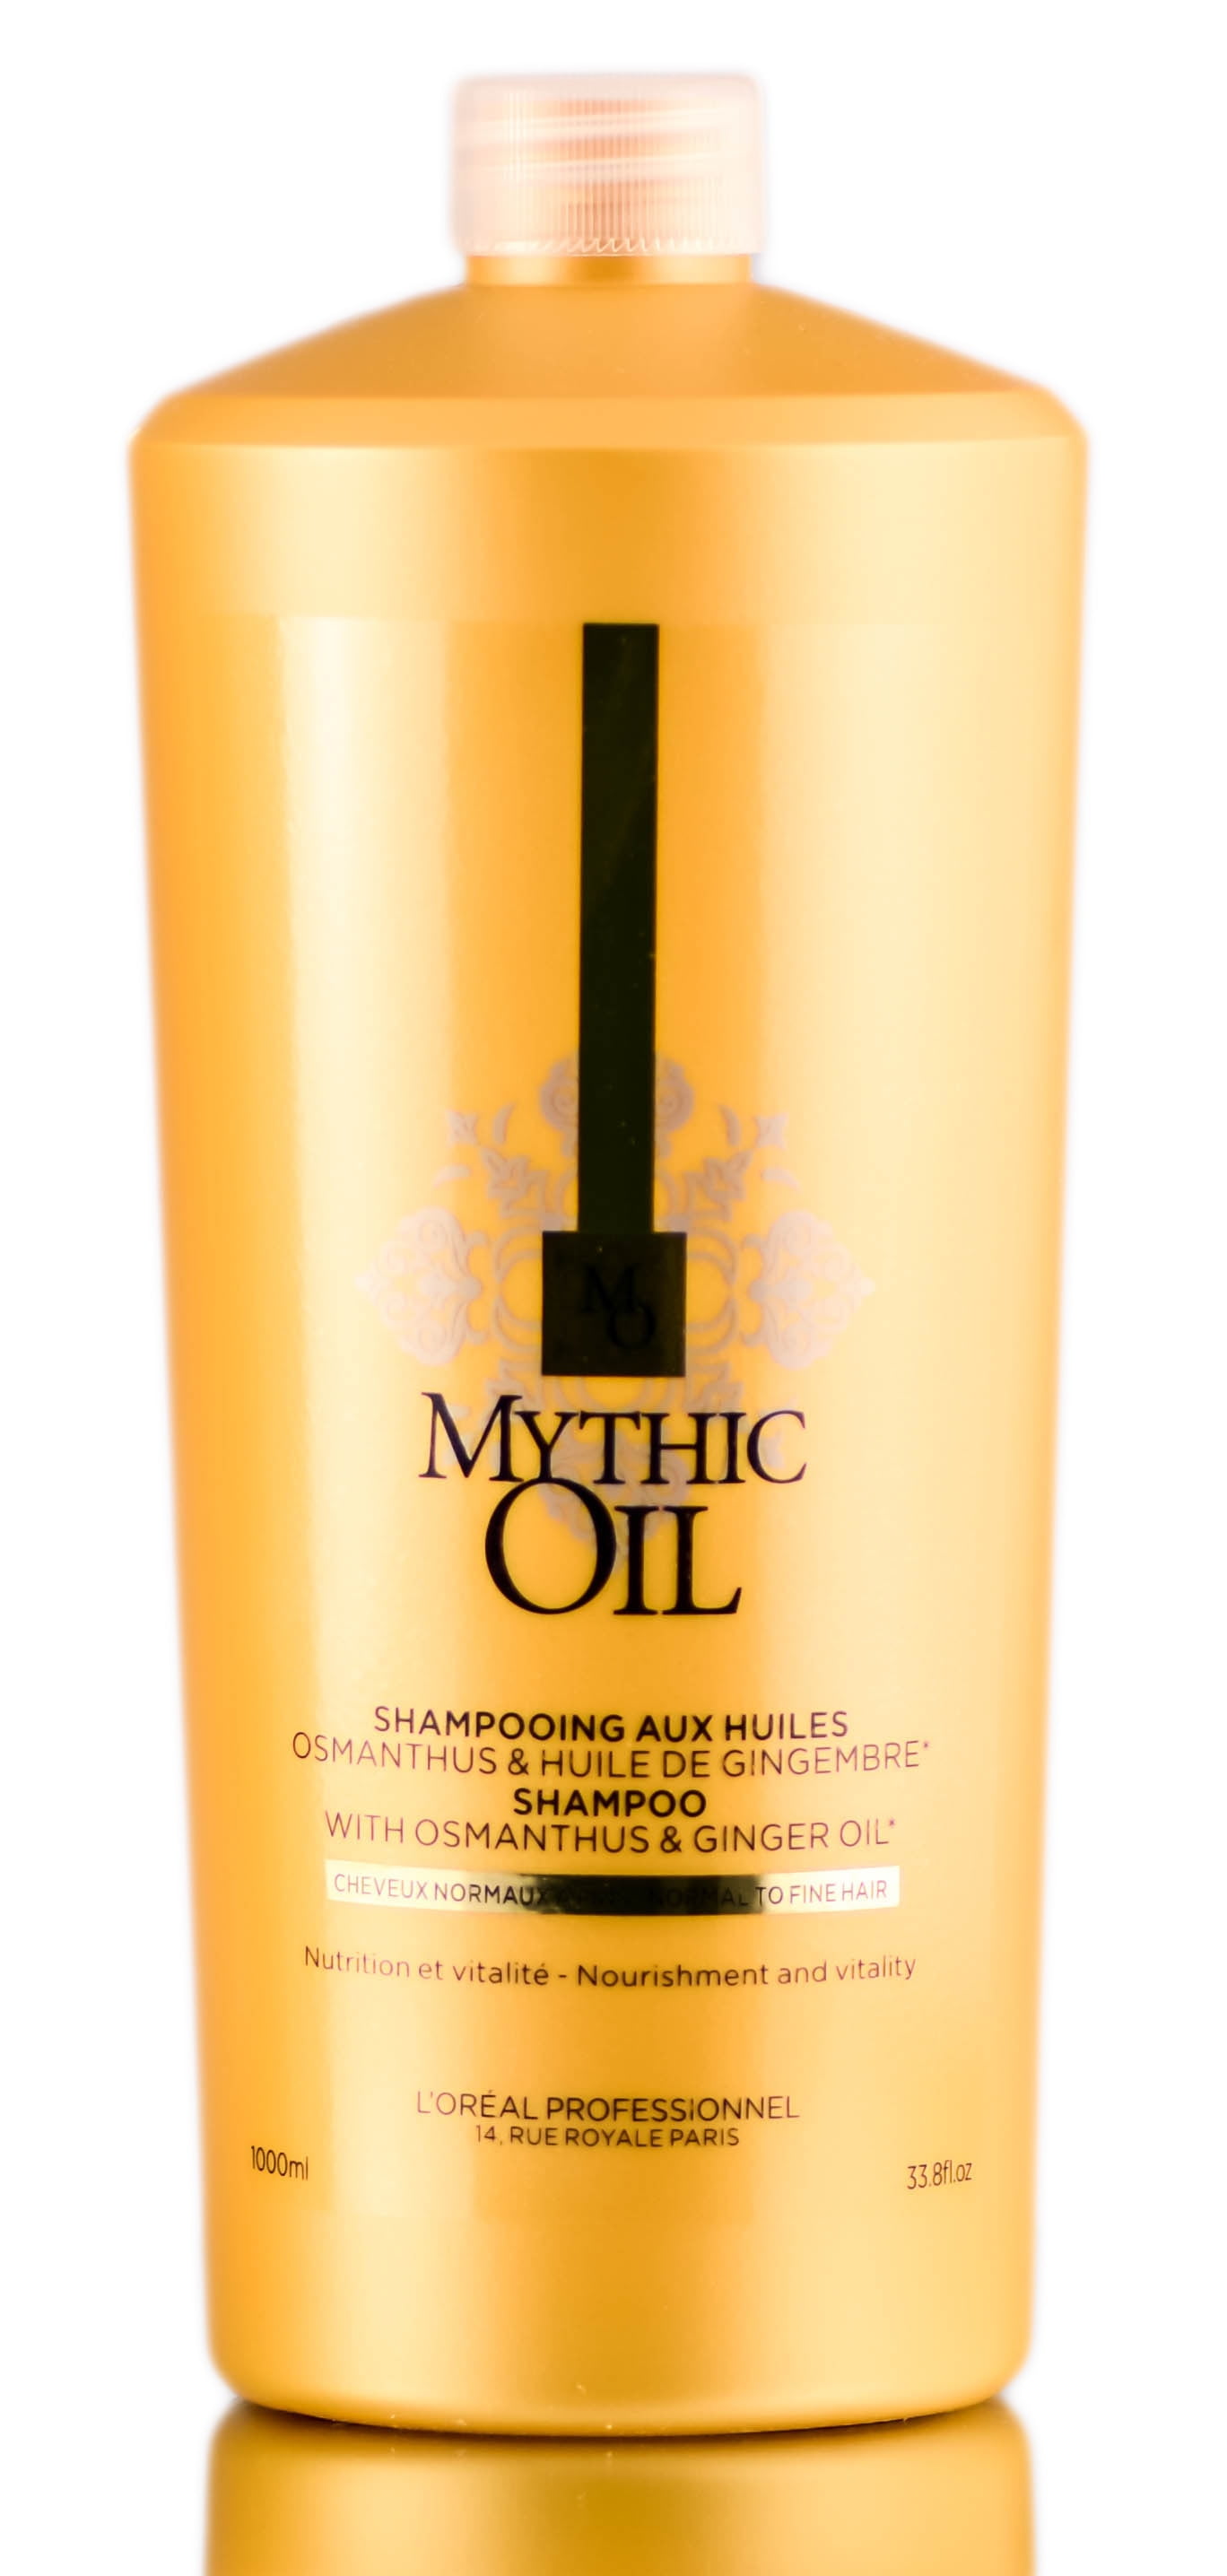 33.8 oz , L'Oreal Pro Mythic Oil Shampoo (Normal to Fine Hair) , Hair Beauty Product Pack of 1 w/ Comb - Walmart.com